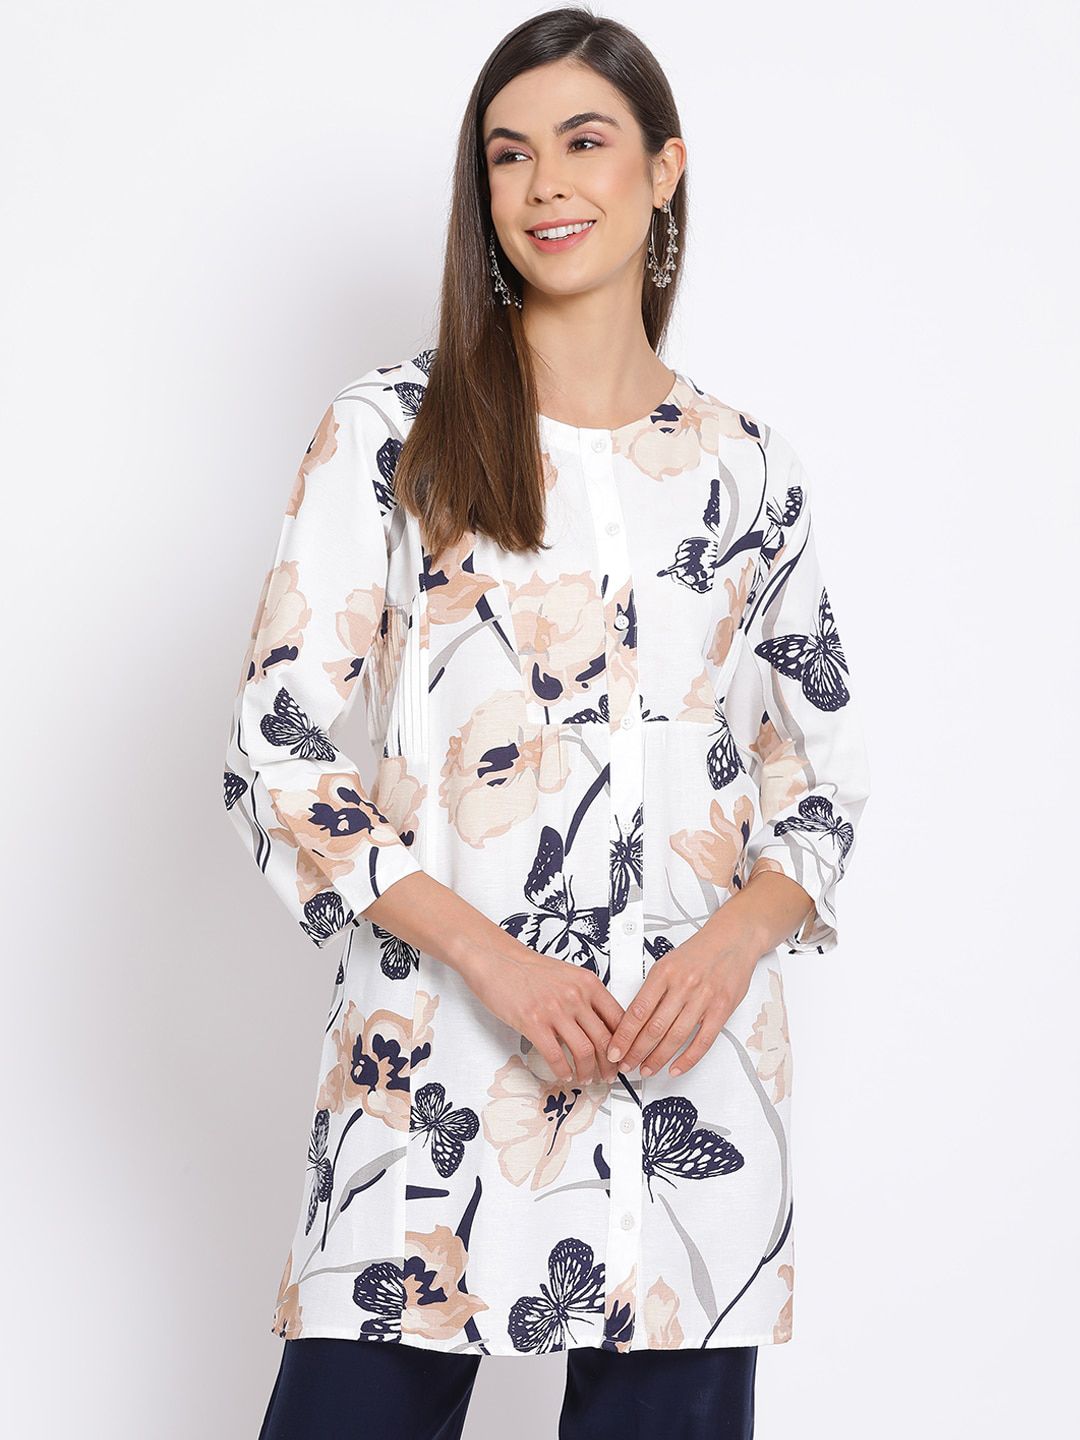 Oxolloxo Women's White & Navy Blue Printed Tunic Price in India